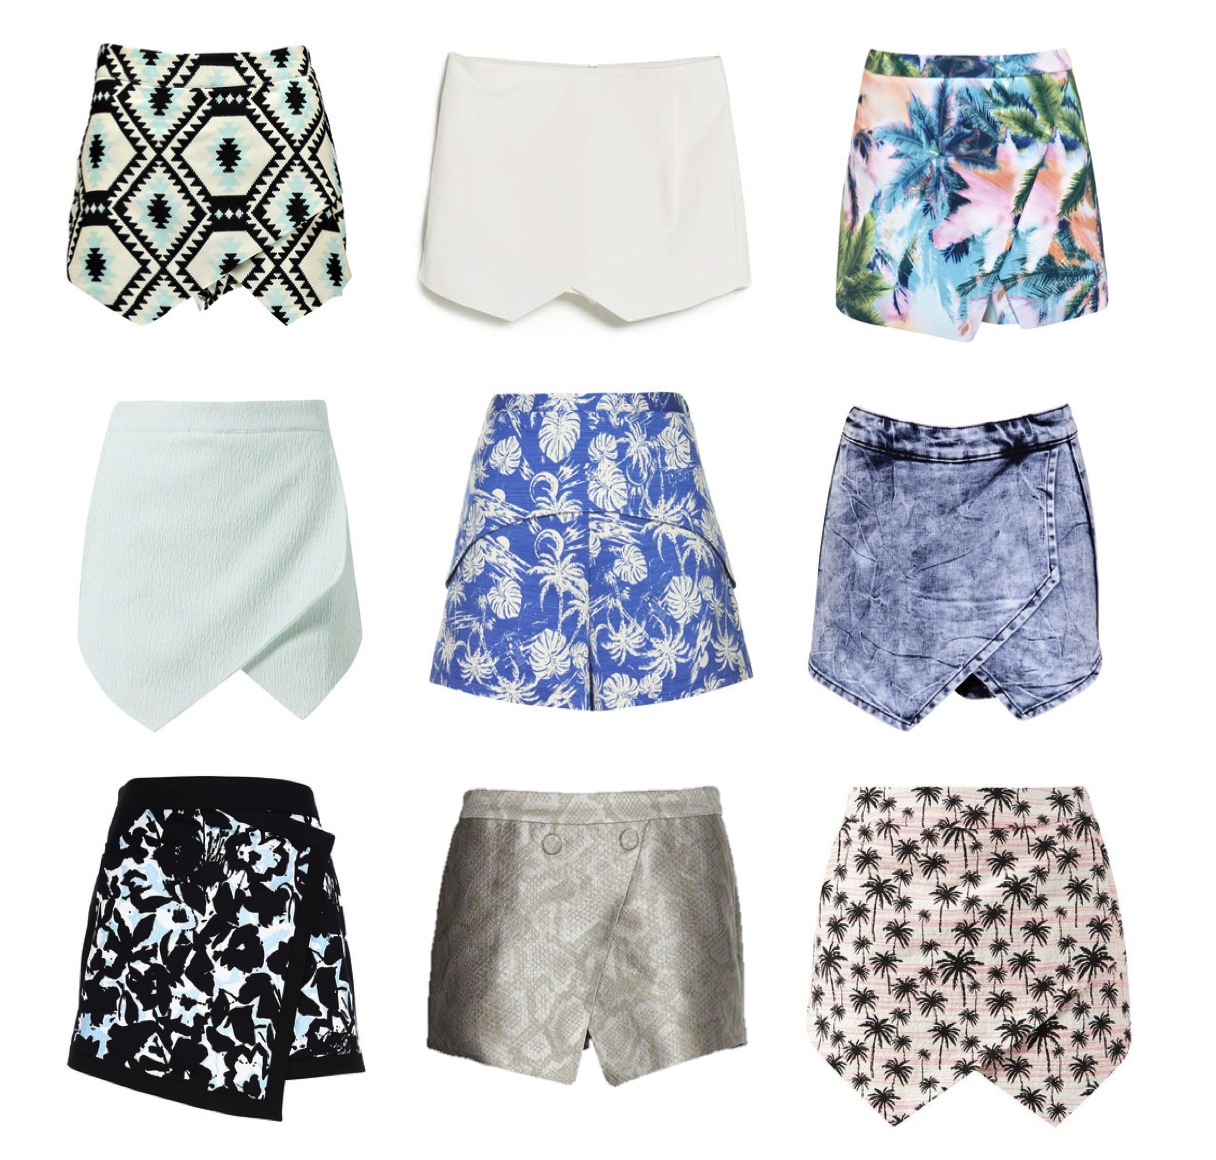 Trend Lust: Skorts are shorts | According to Yanni D